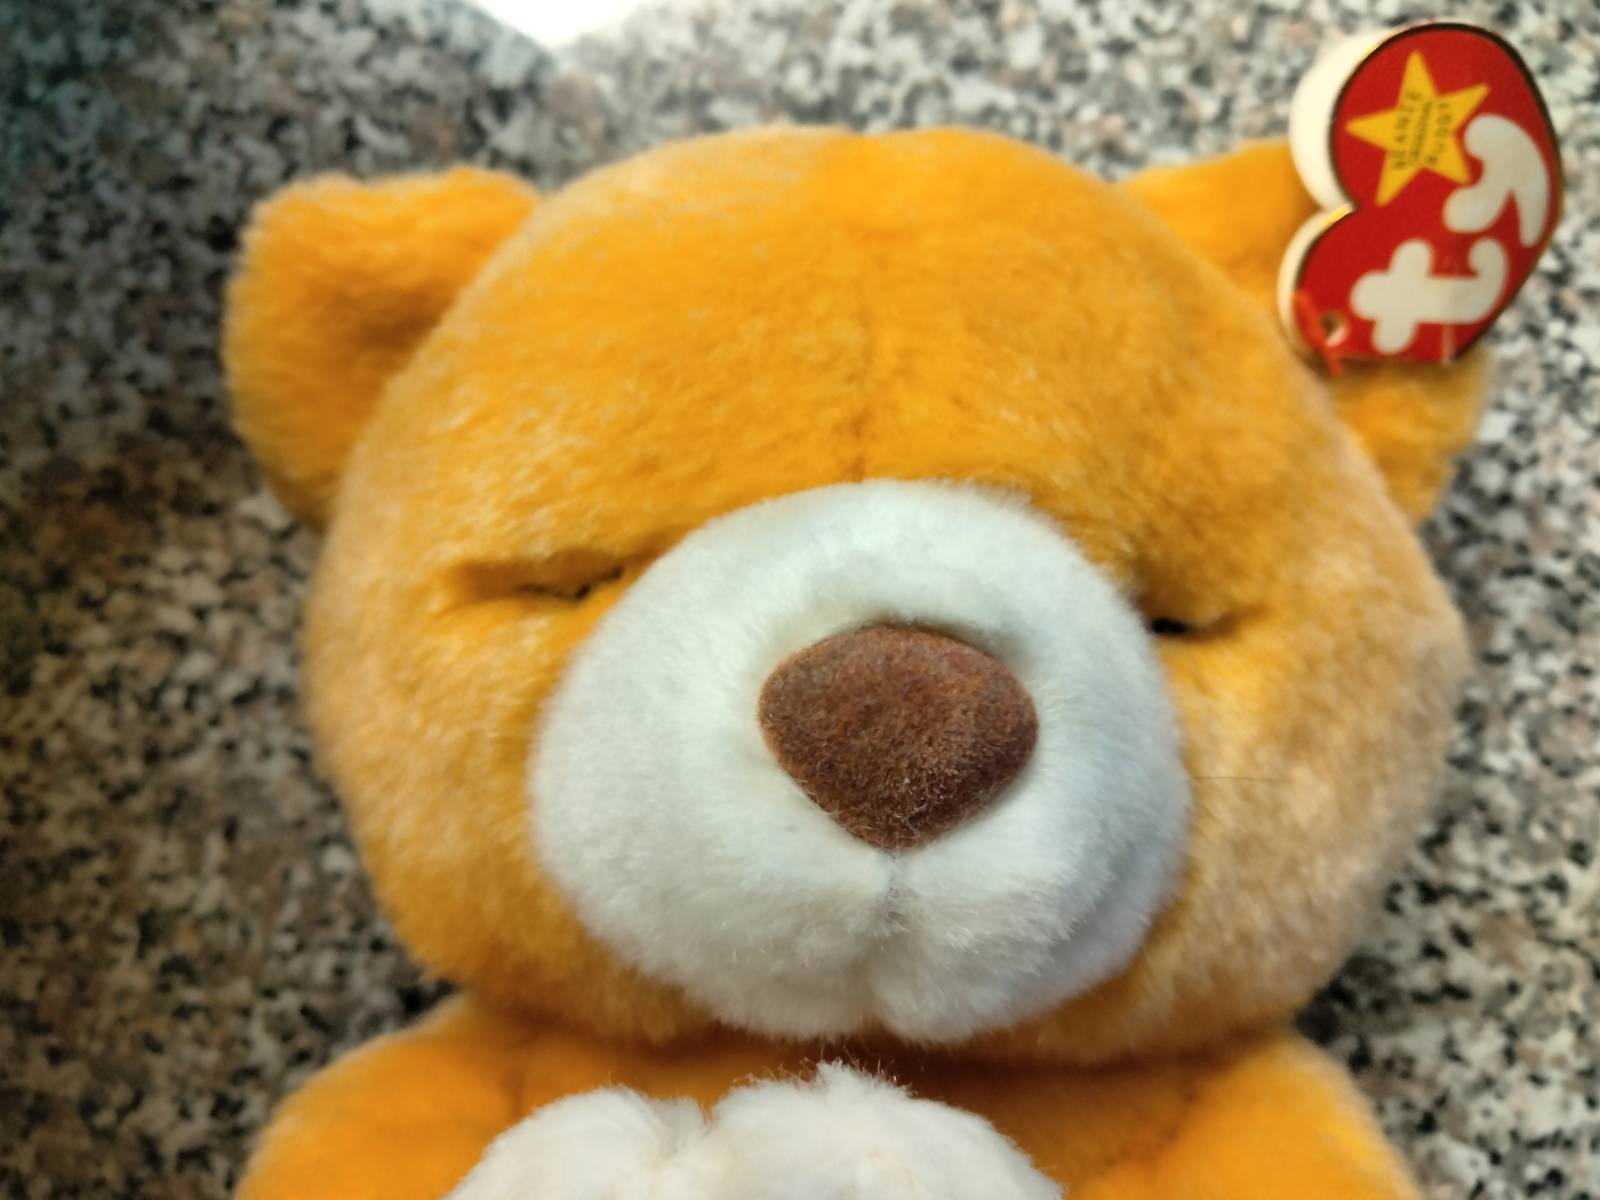 Primary image for Ty Beanie Buddies Hope the Praying Amber plush bear (residue on hangtag)